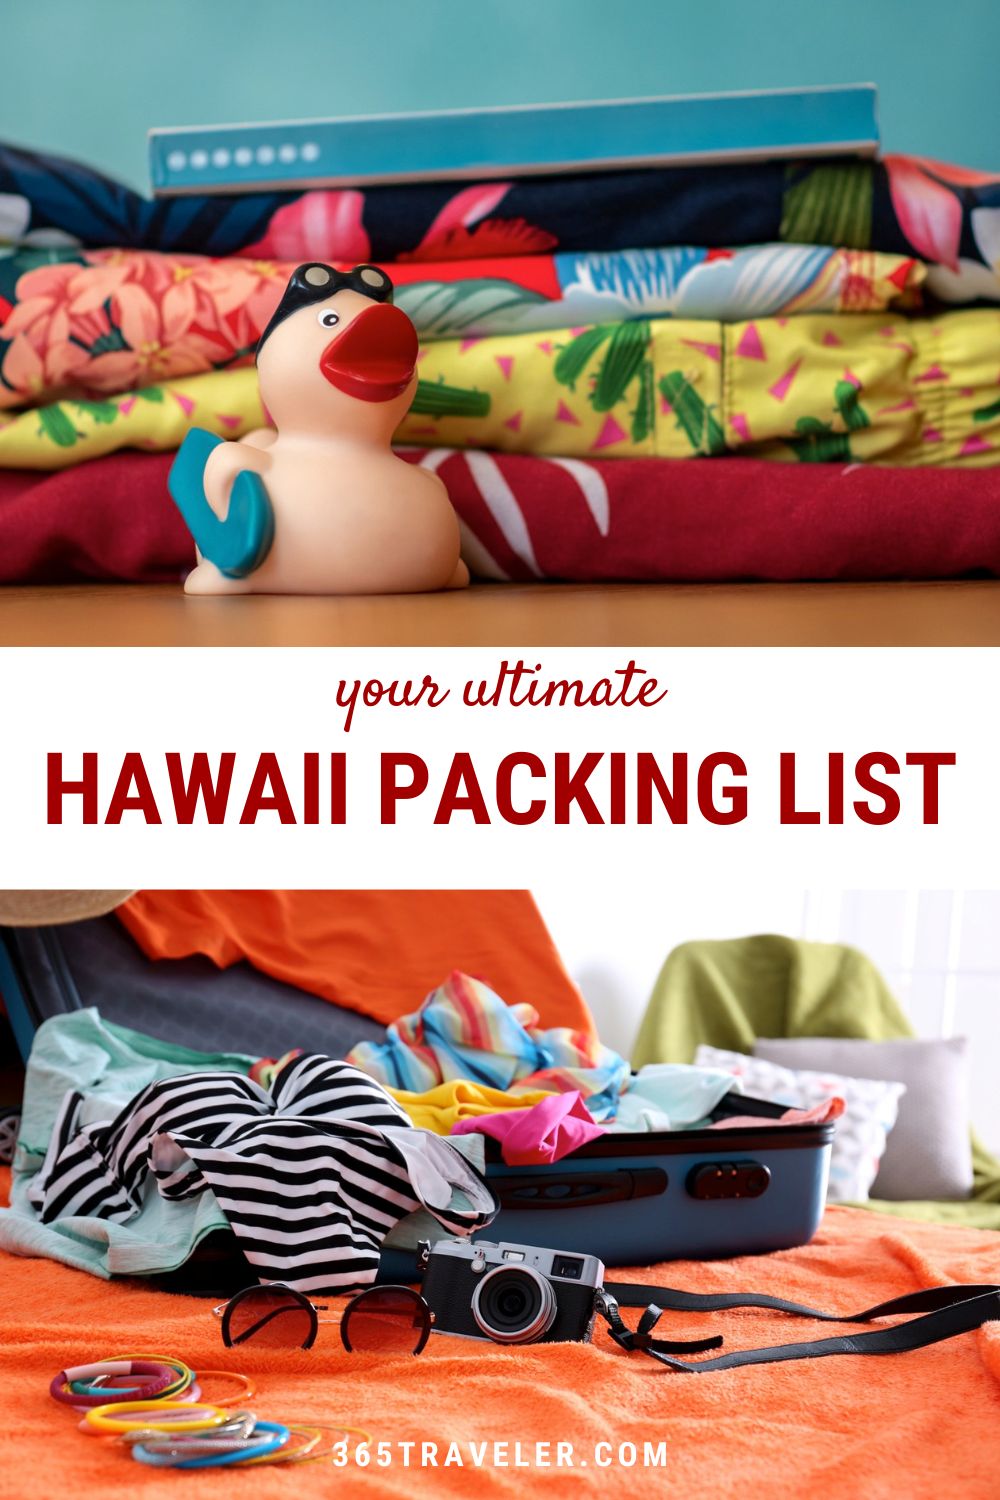 THE ULTIMATE HAWAII PACKING LIST FOR YOUR TROPICAL VACATION